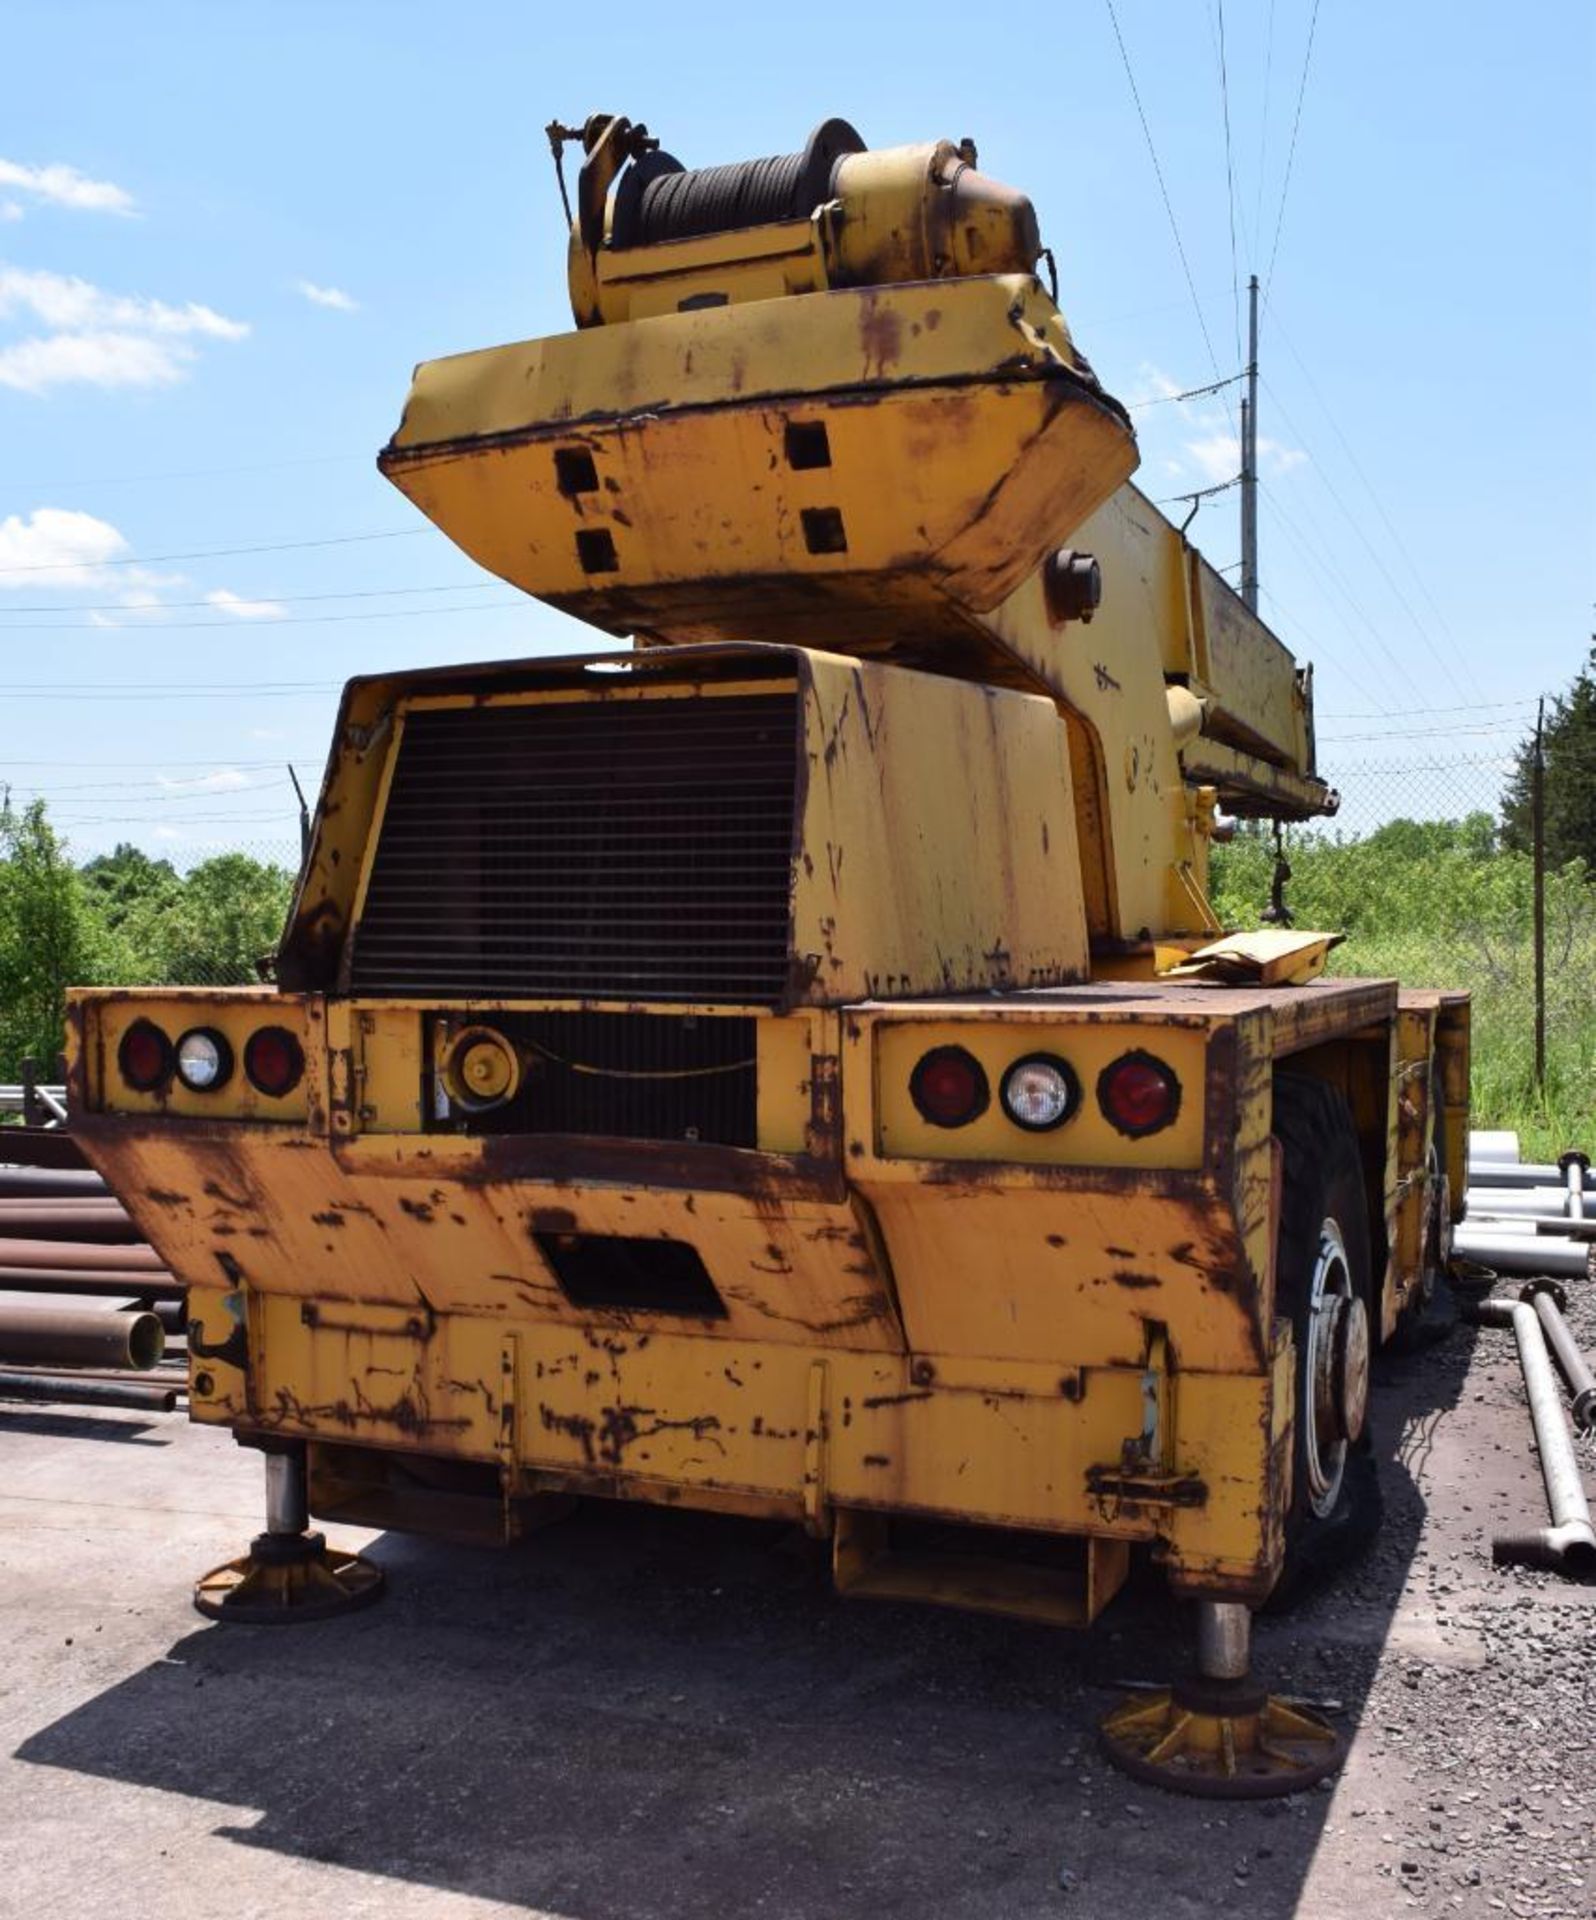 Boecking Machinery 40 Ton Rough Terrain Crane, Model RT40. NOT IN RUNNING CONDITION. - Image 3 of 7